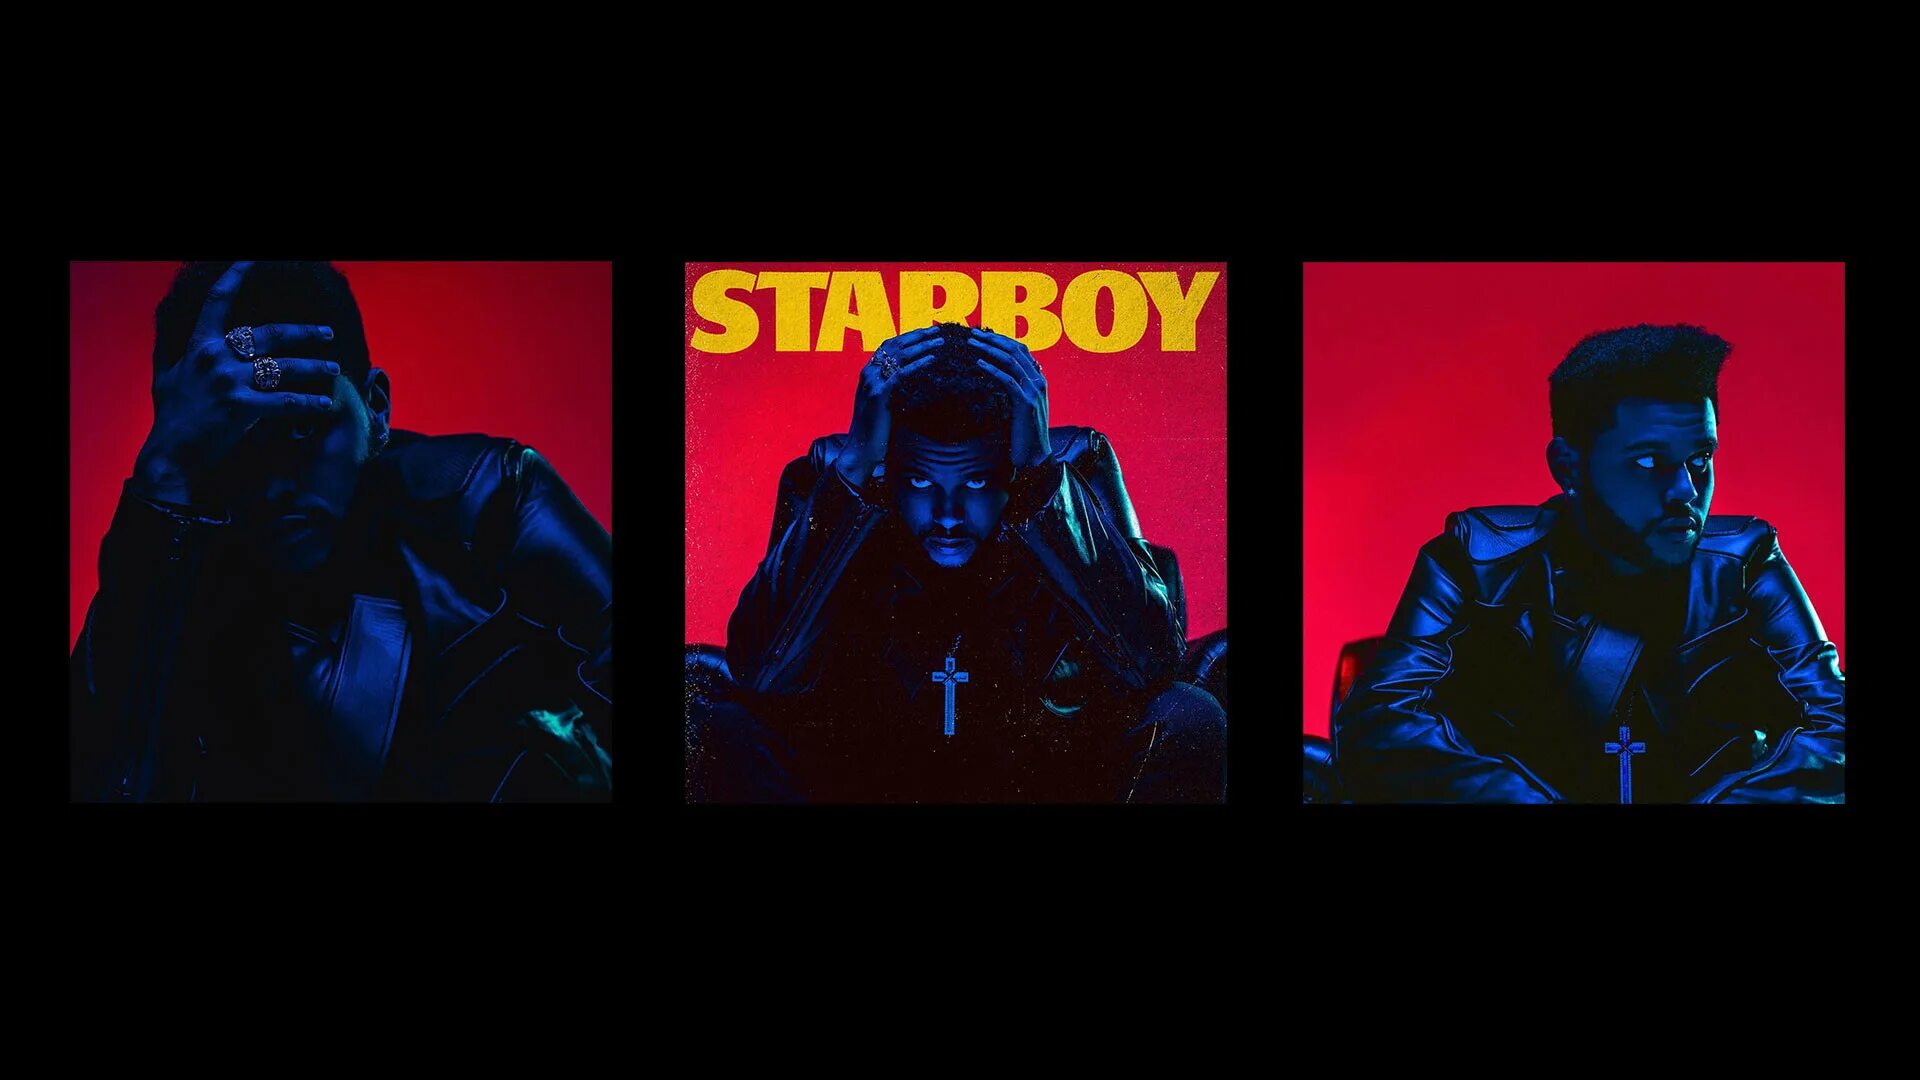 A lot at the weekend. The Weeknd 2022. The Weeknd Starboy album Cover. Starboy the Weeknd обложка. The Weeknd Эстетика.